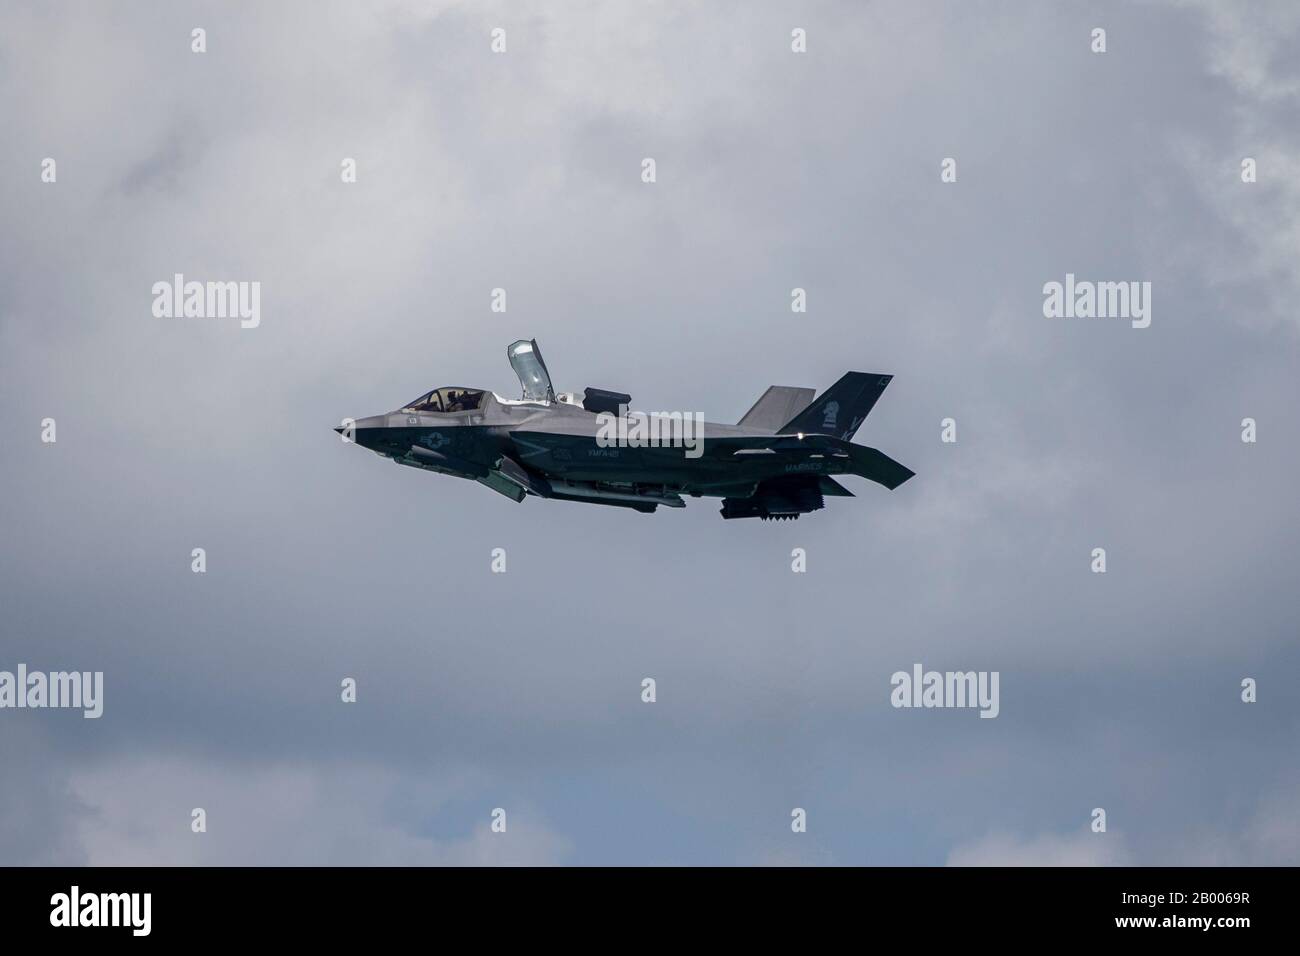 A U.S. Marine Corps F-35B Lightning II with Marine Fighter Attack Squadron (VMFA) 121 hovers in the air during an aerial demonstration at the Singapore Airshow 2020 near Changi Exhibition Center, Republic of Singapore, 2020 Feb. 15, 2020. Singapore Airshow 2020 showcased various U.S. military aircraft and featured the F-22 Raptor and the F-35B Lightning II aerial demo teams. This was the first time both stealth fighter attack jets participated in the aerial demonstration, giving spectators an unprecedented look at the advanced fifth generation fighters. (U.S. Marine Corps photo by Staff Sgt. V Stock Photo